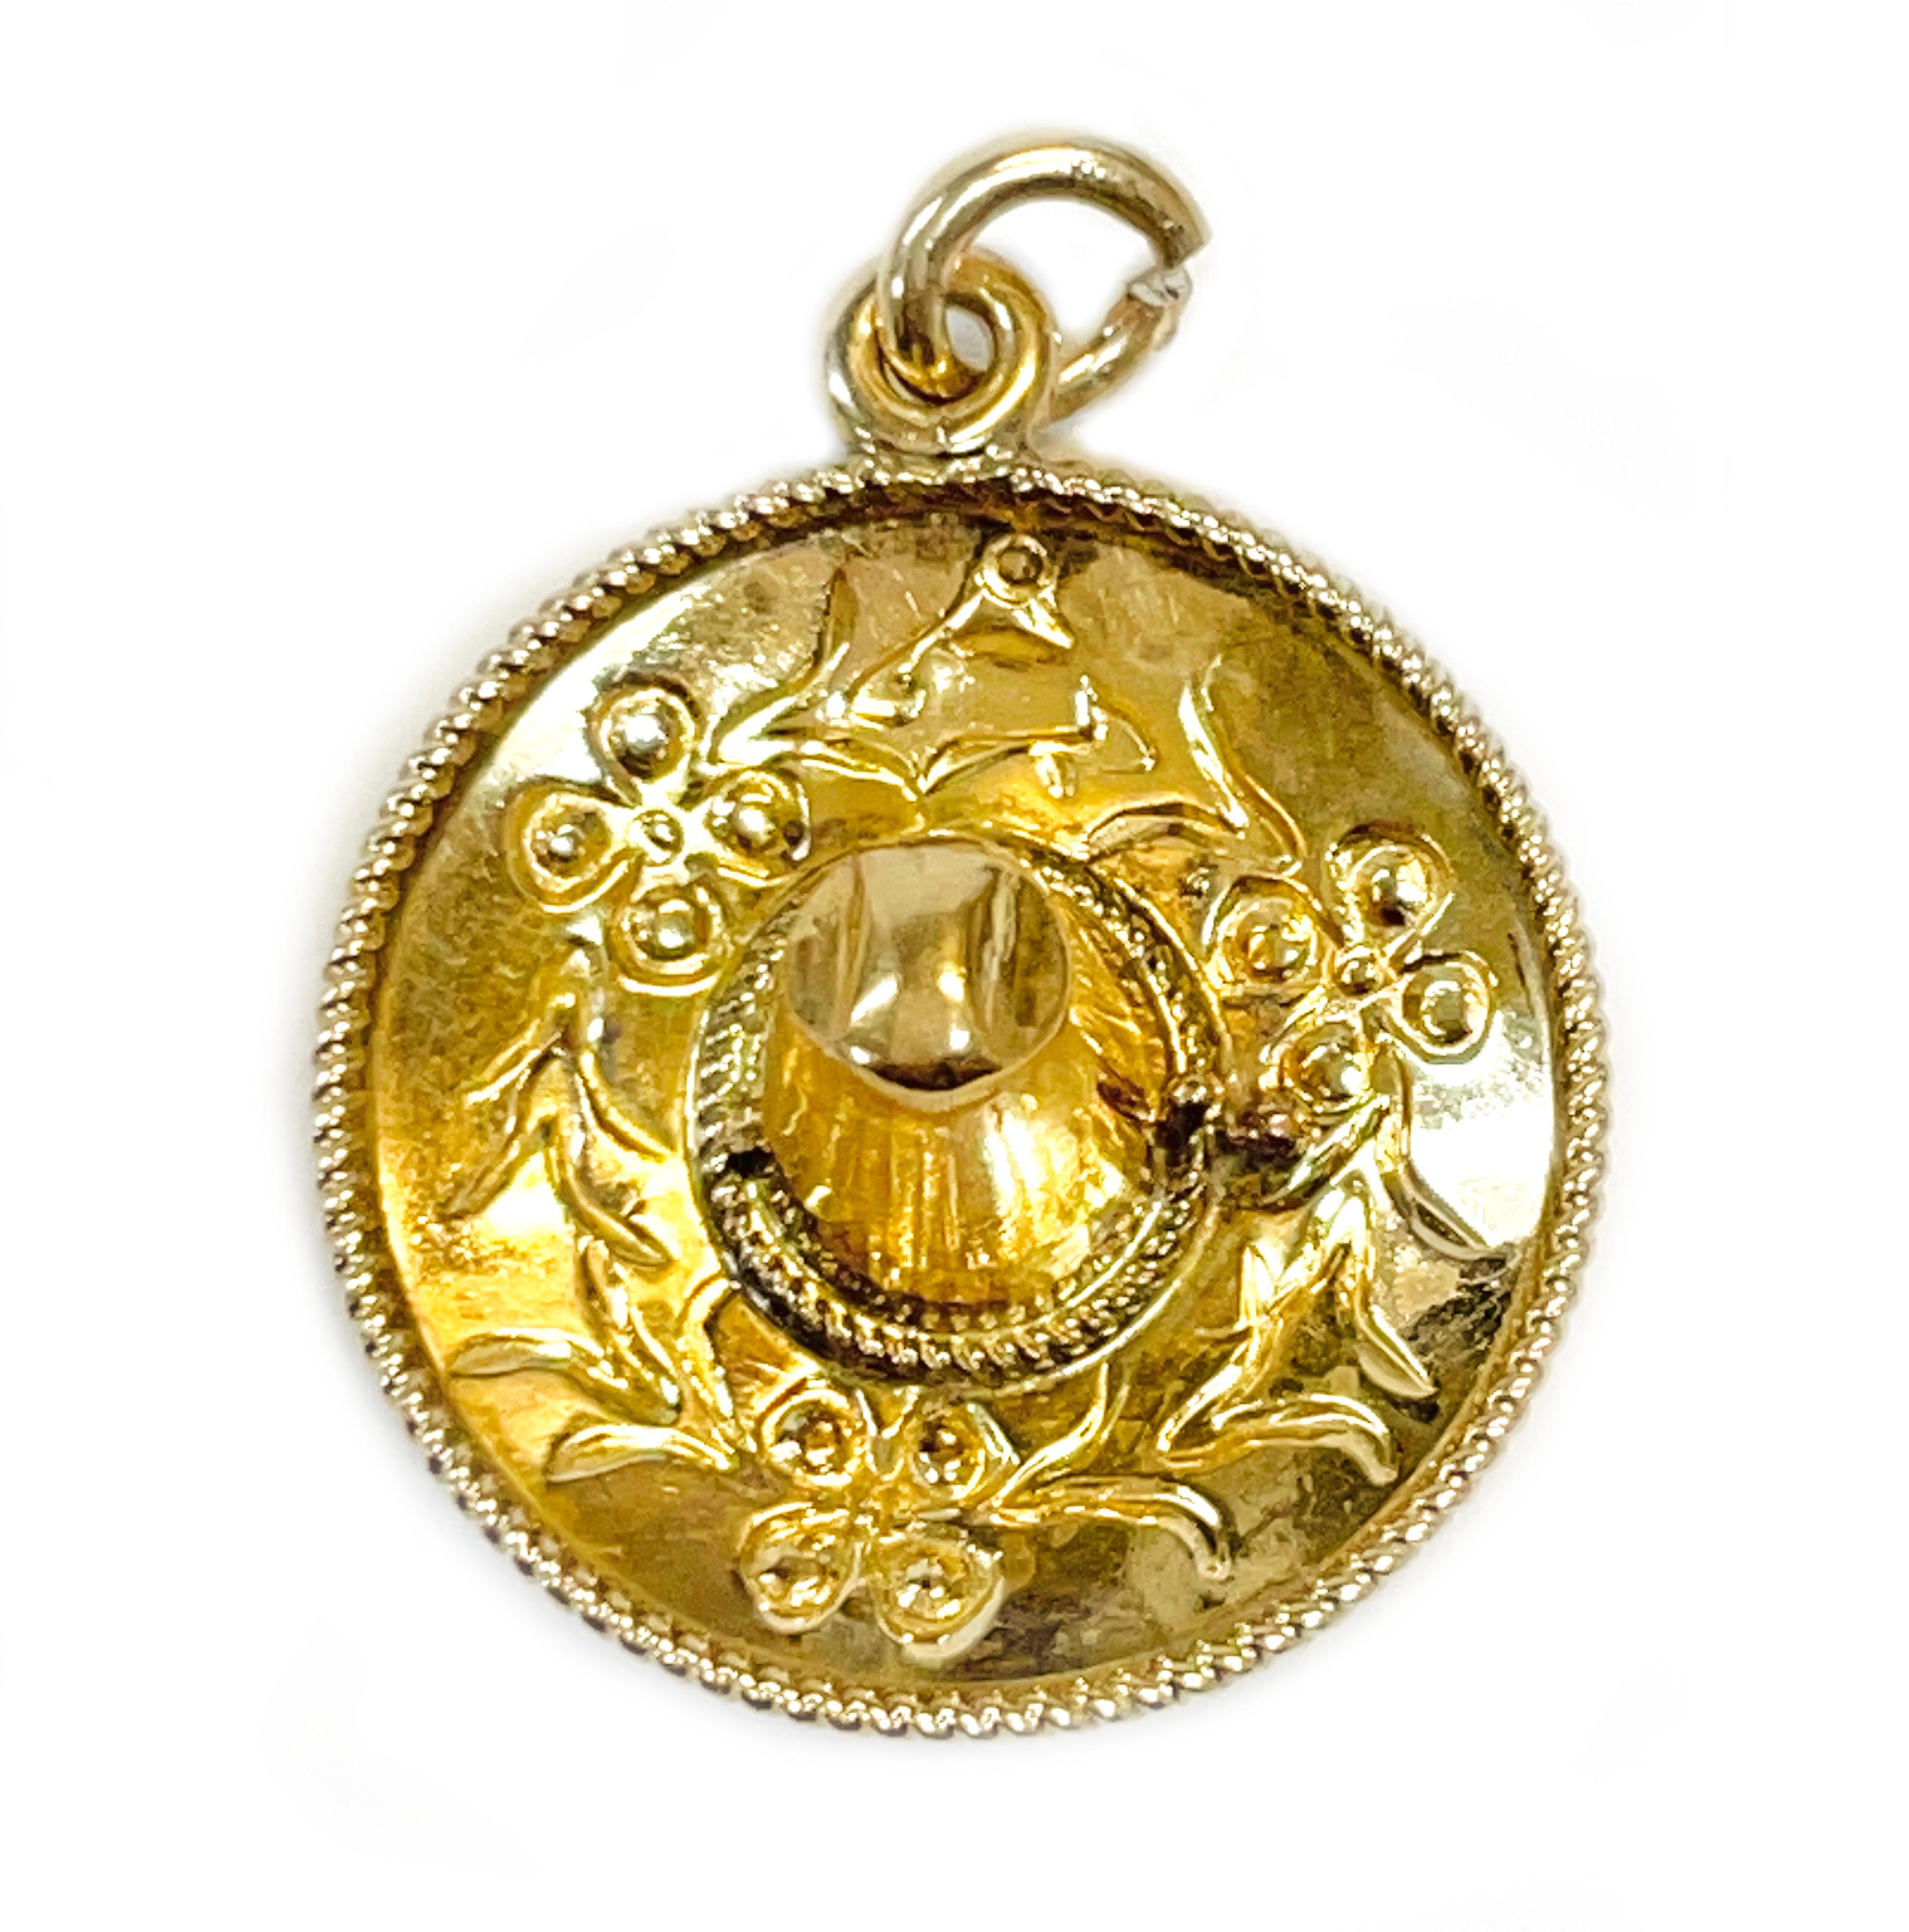 14 Karat yellow gold sombrero charm pendant. This lovely sombrero pendant offers nice detail with flowers and leaves design and rope trim. The pendant measures 17.9mm wide x 5.8mm tall. Stamped on the bottom is the 14K. This would look great on a